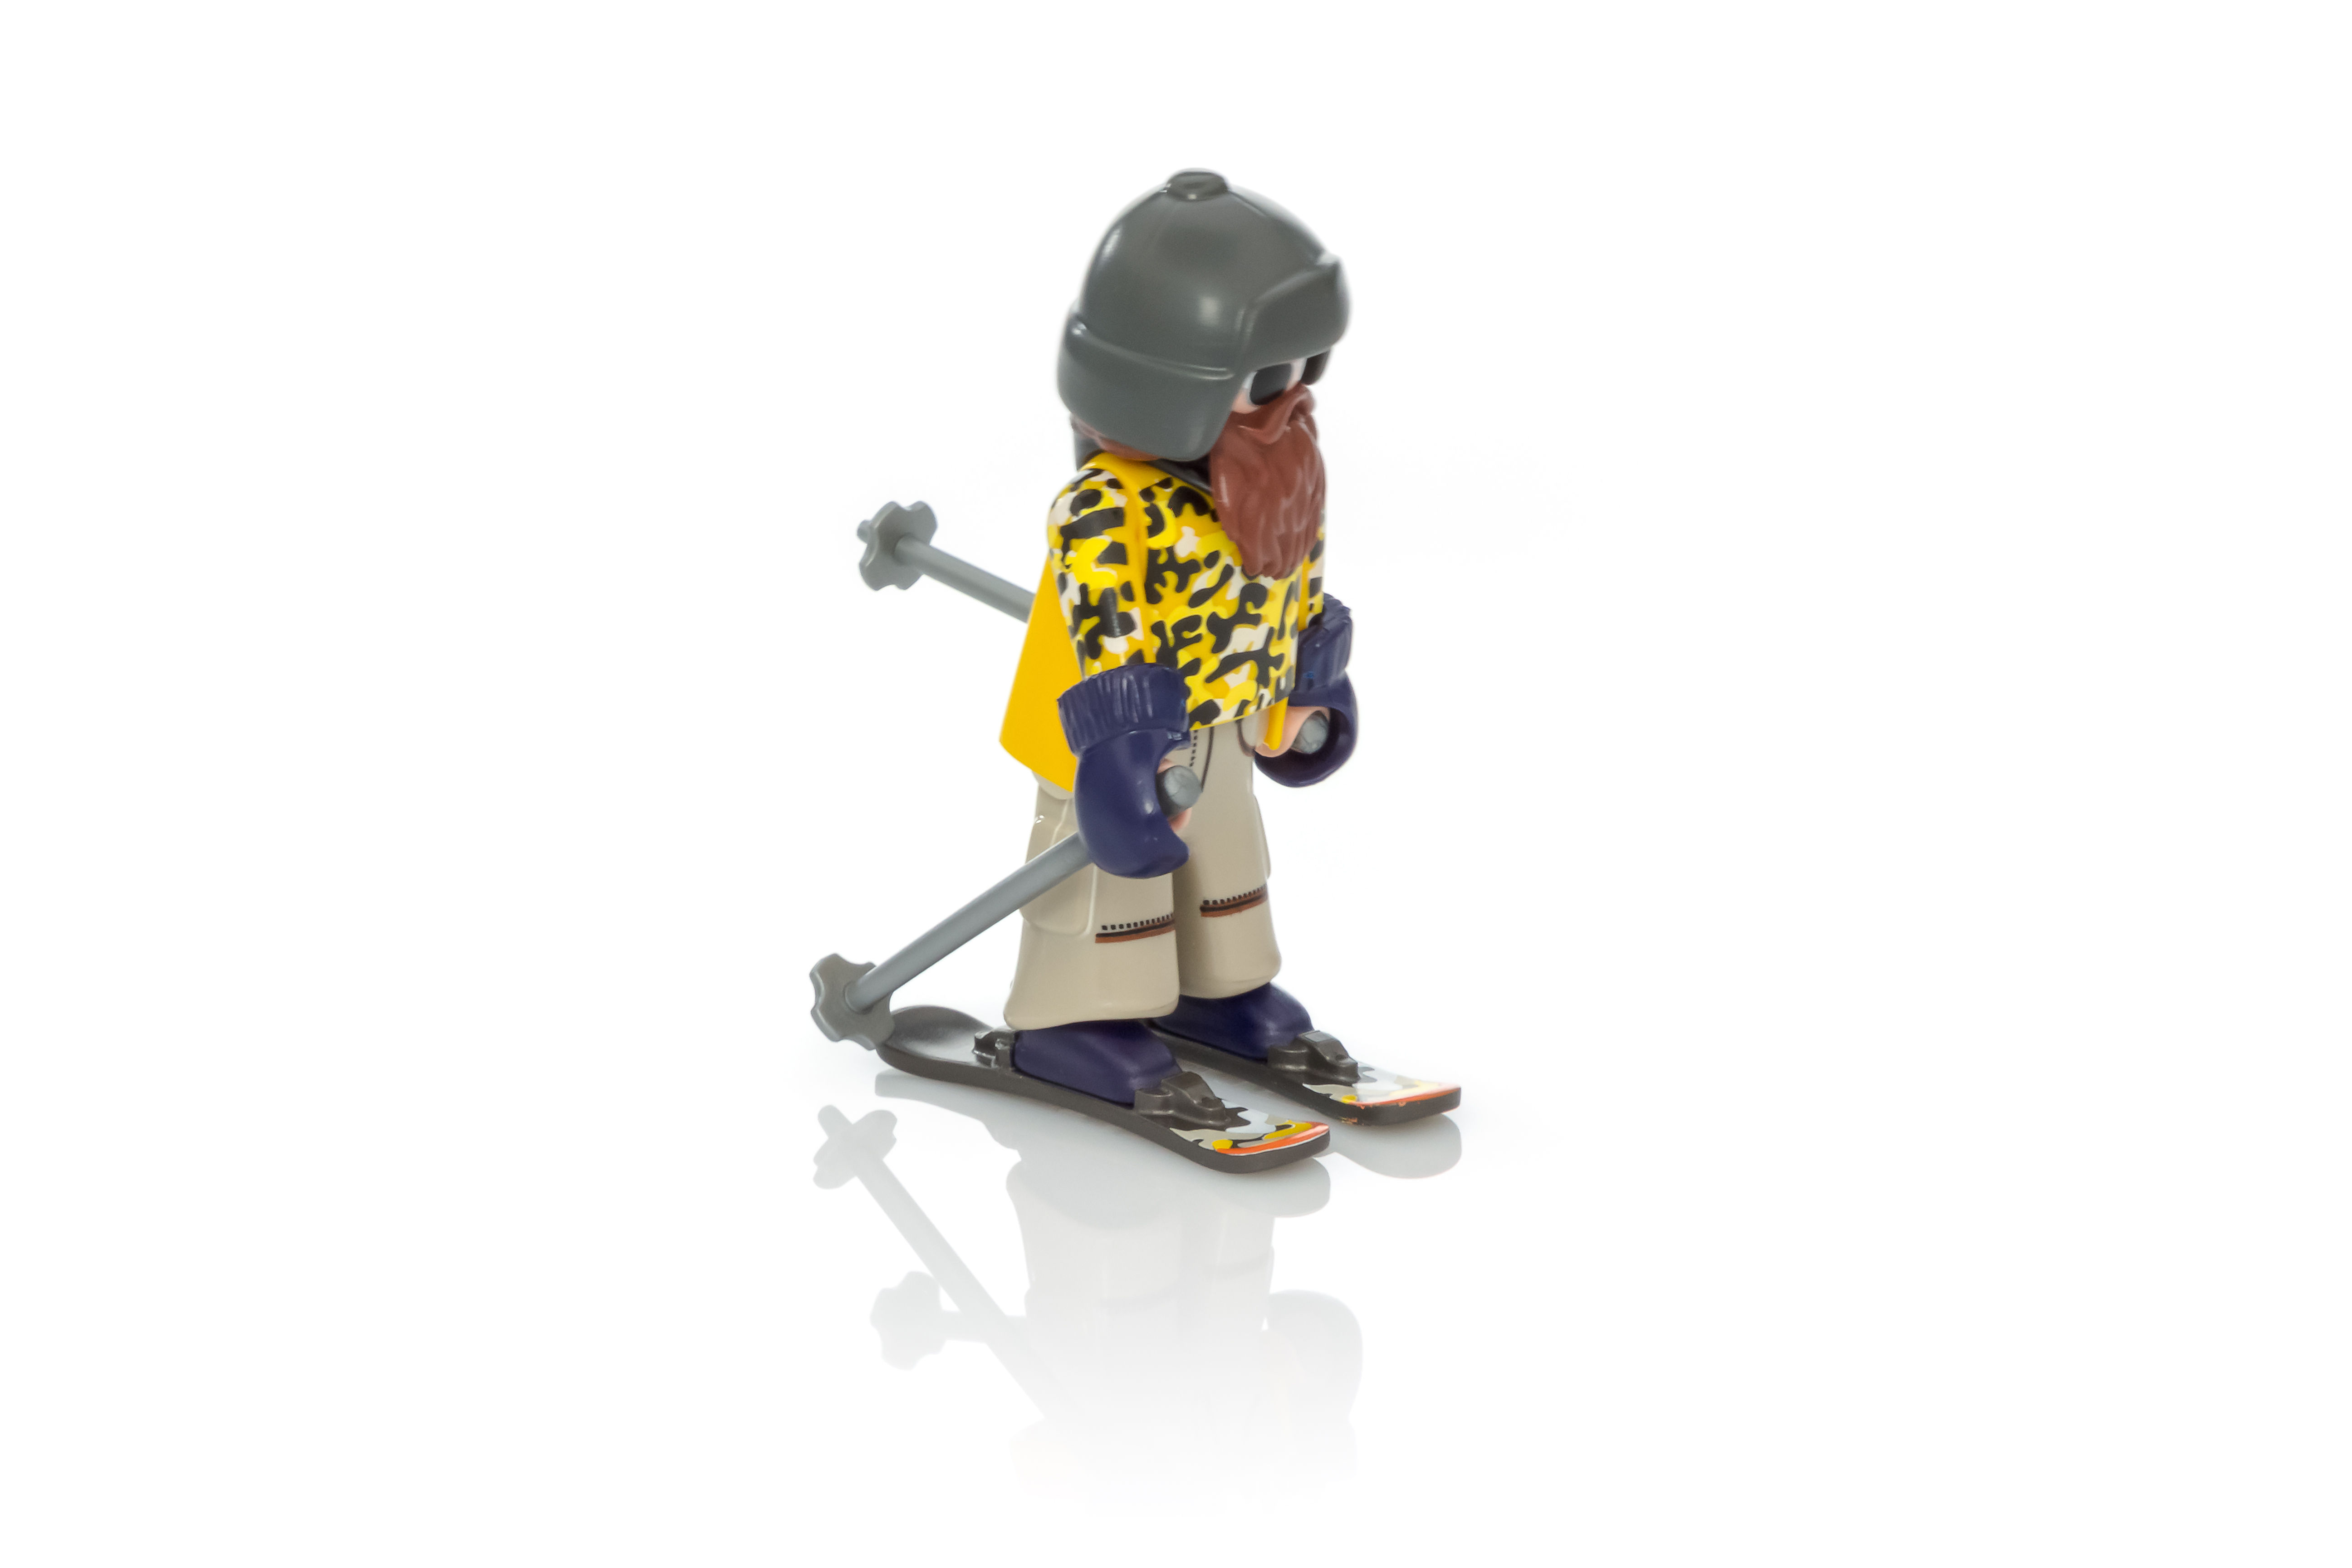 PLAYMOBIL Skier with Poles Building Set